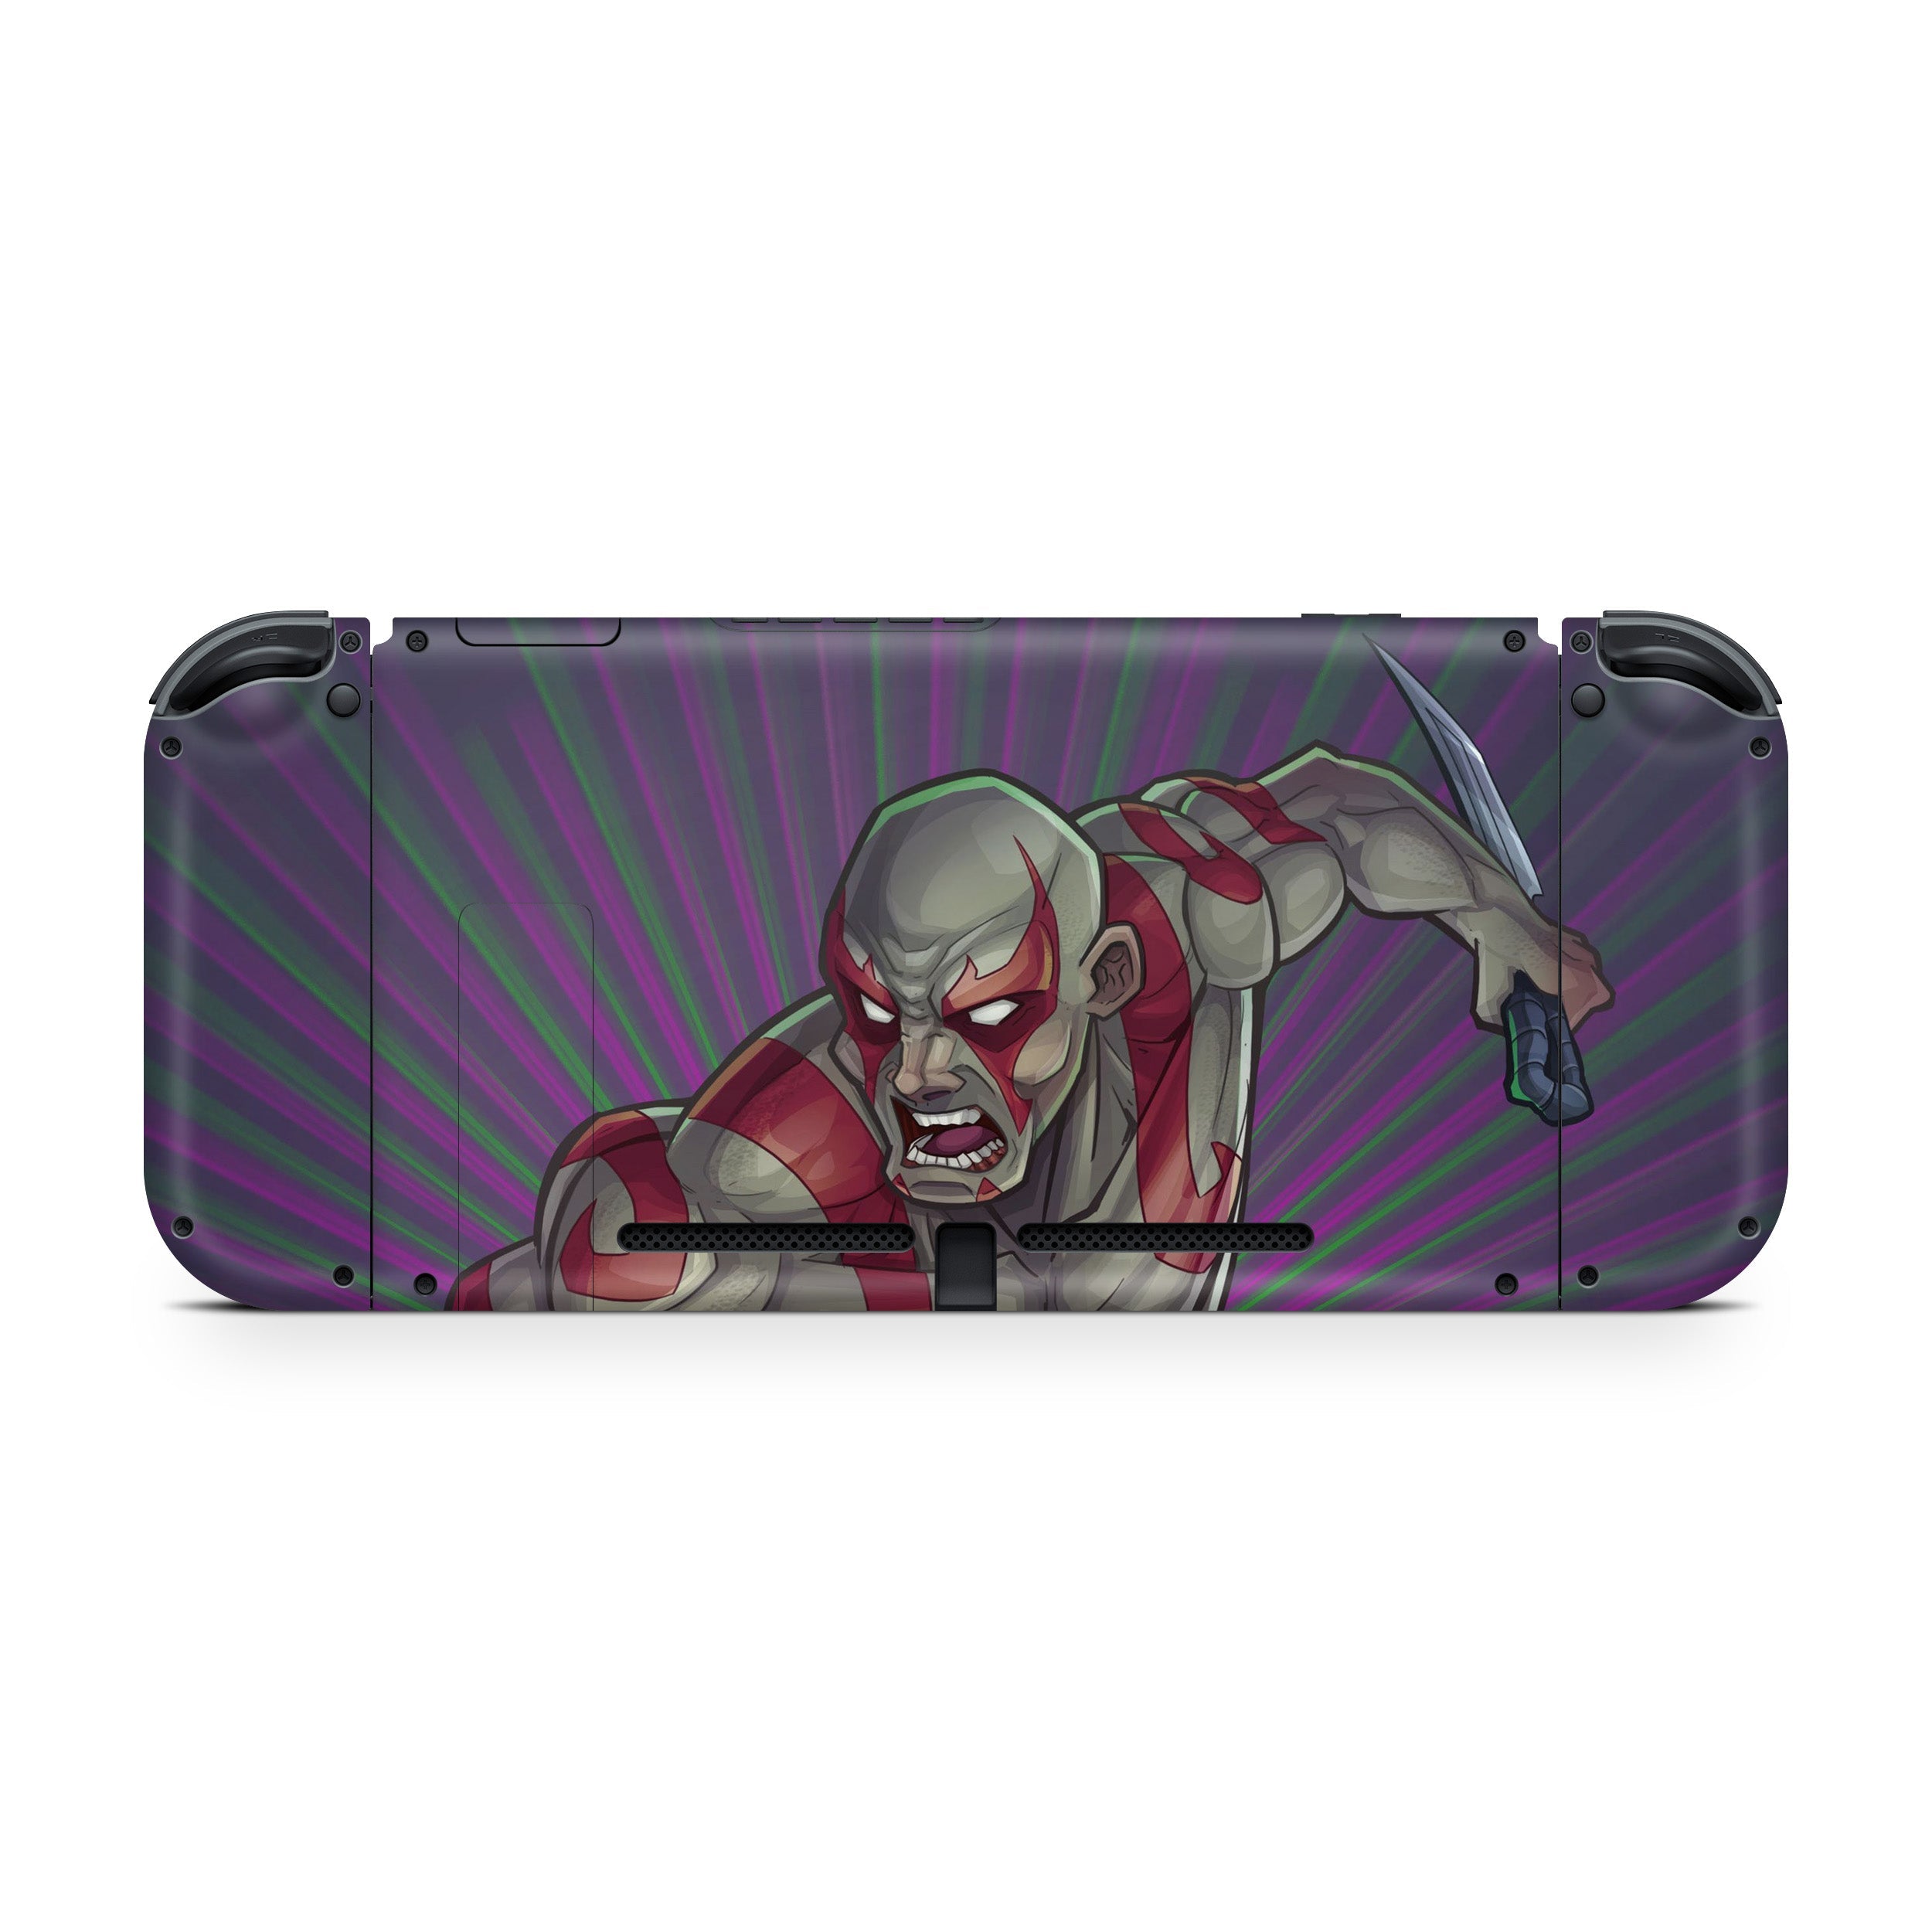 A video game skin featuring a Marvel Guardians of the Galaxy Drax design for the Nintendo Switch.